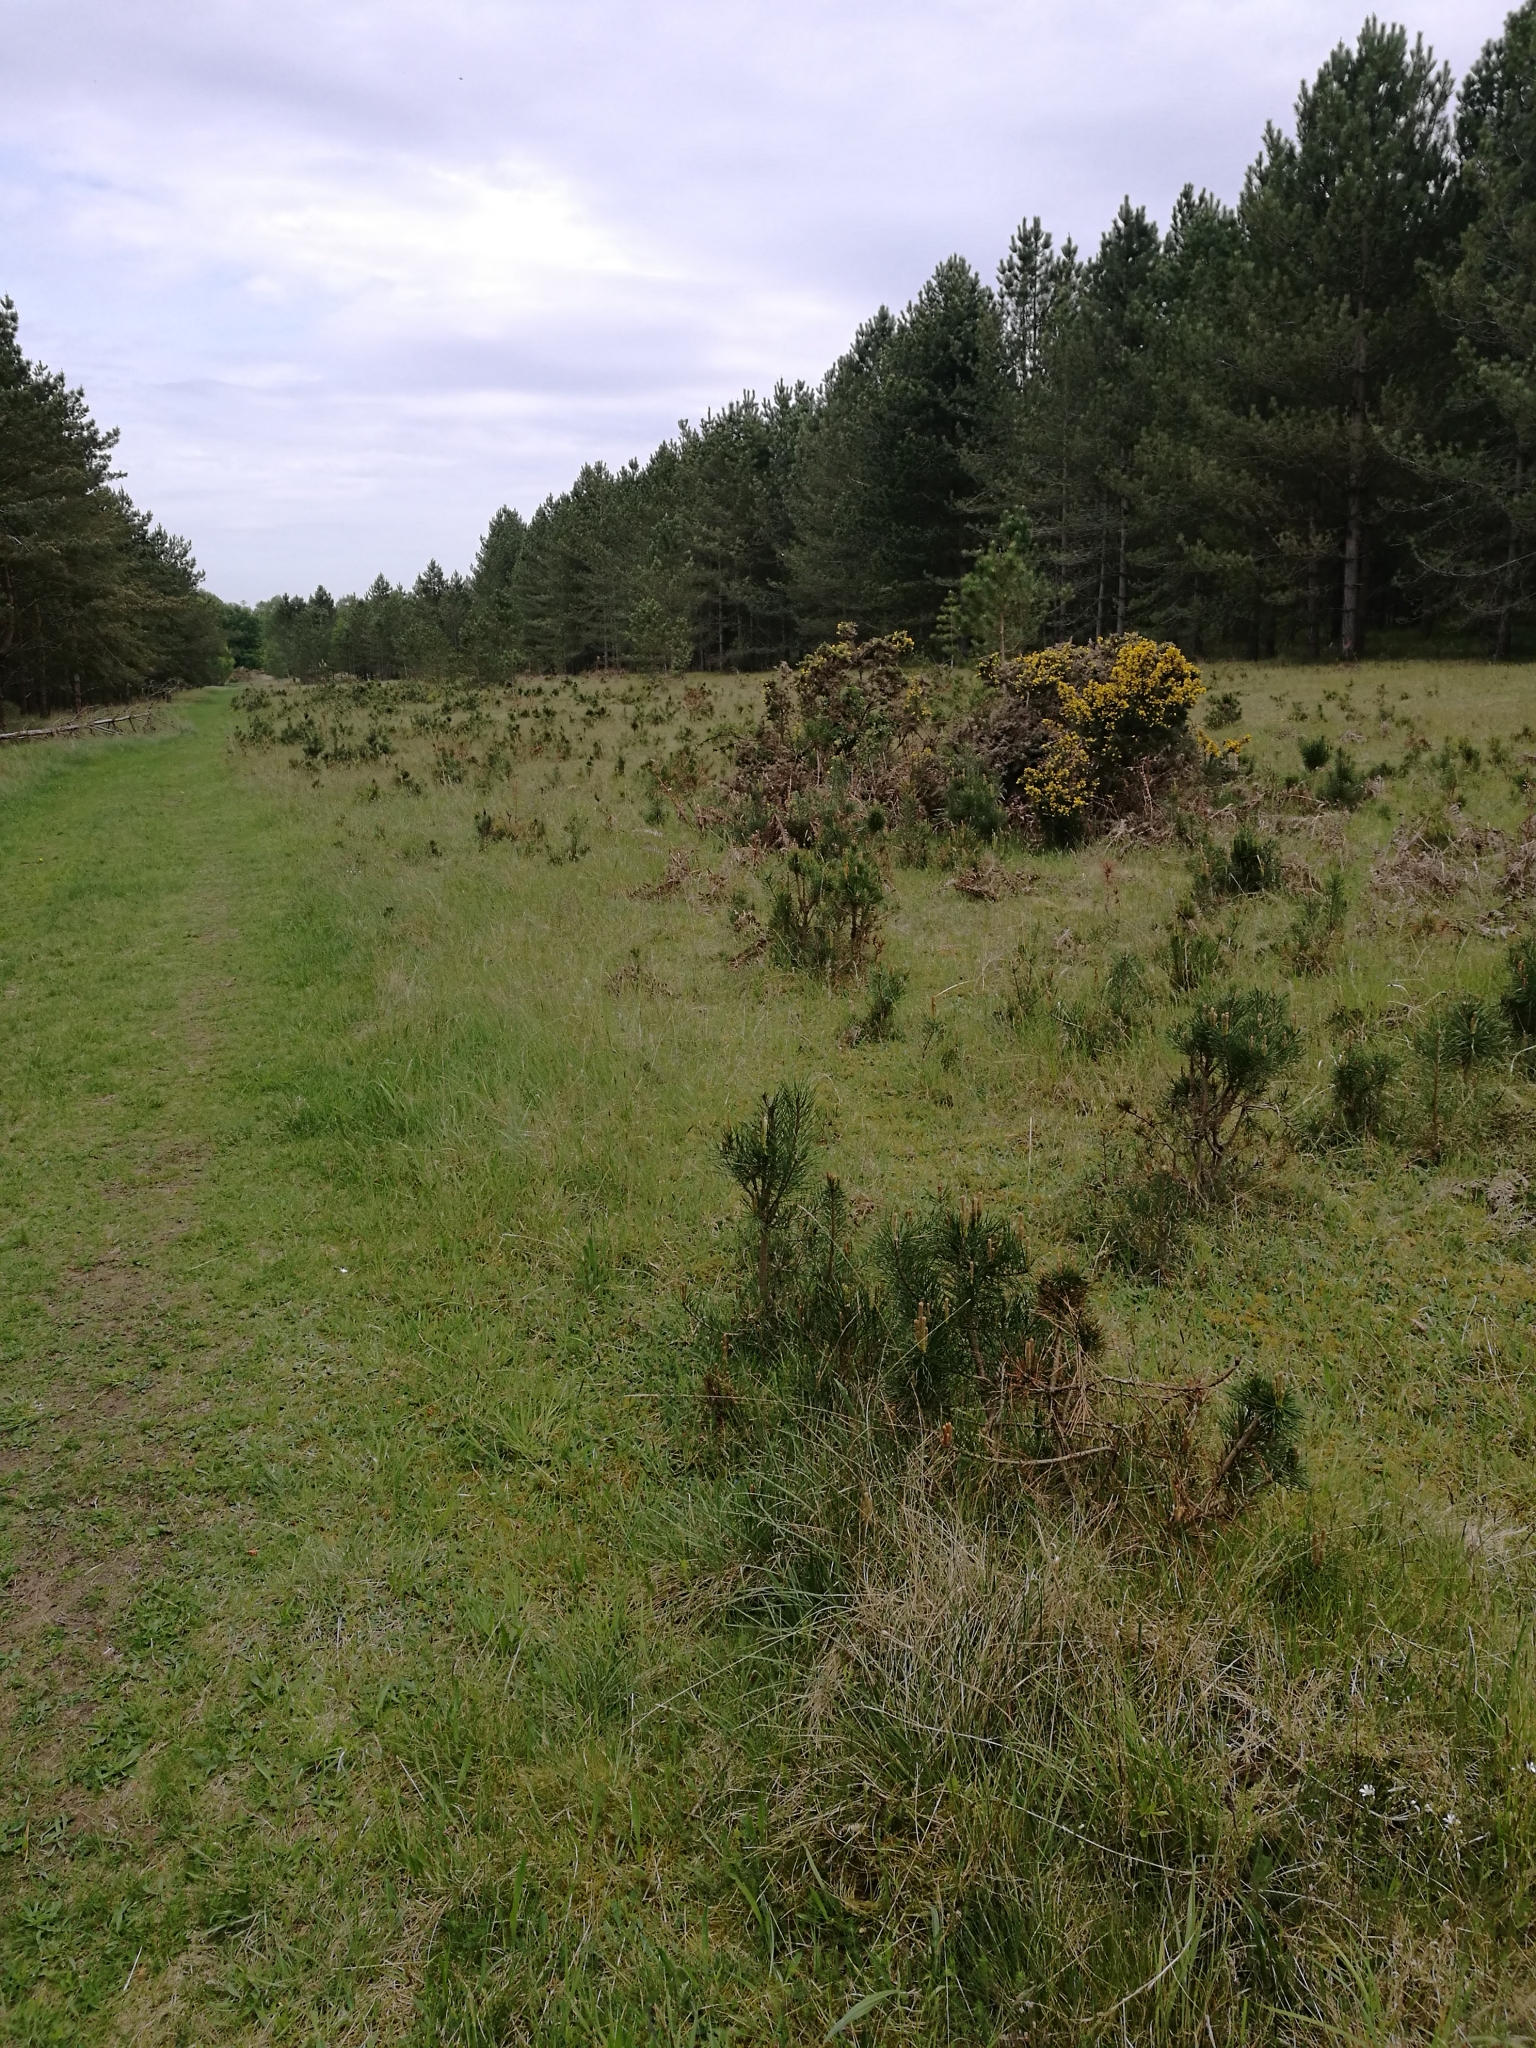 A photo from the FoTF Conservation Event - May 2022 - Self Sown Fir Removal at Kings Forest : Volunteers work to remove self sown Firs in the backgroud, while in the foreground a volunteer carries a handful of removed Firs